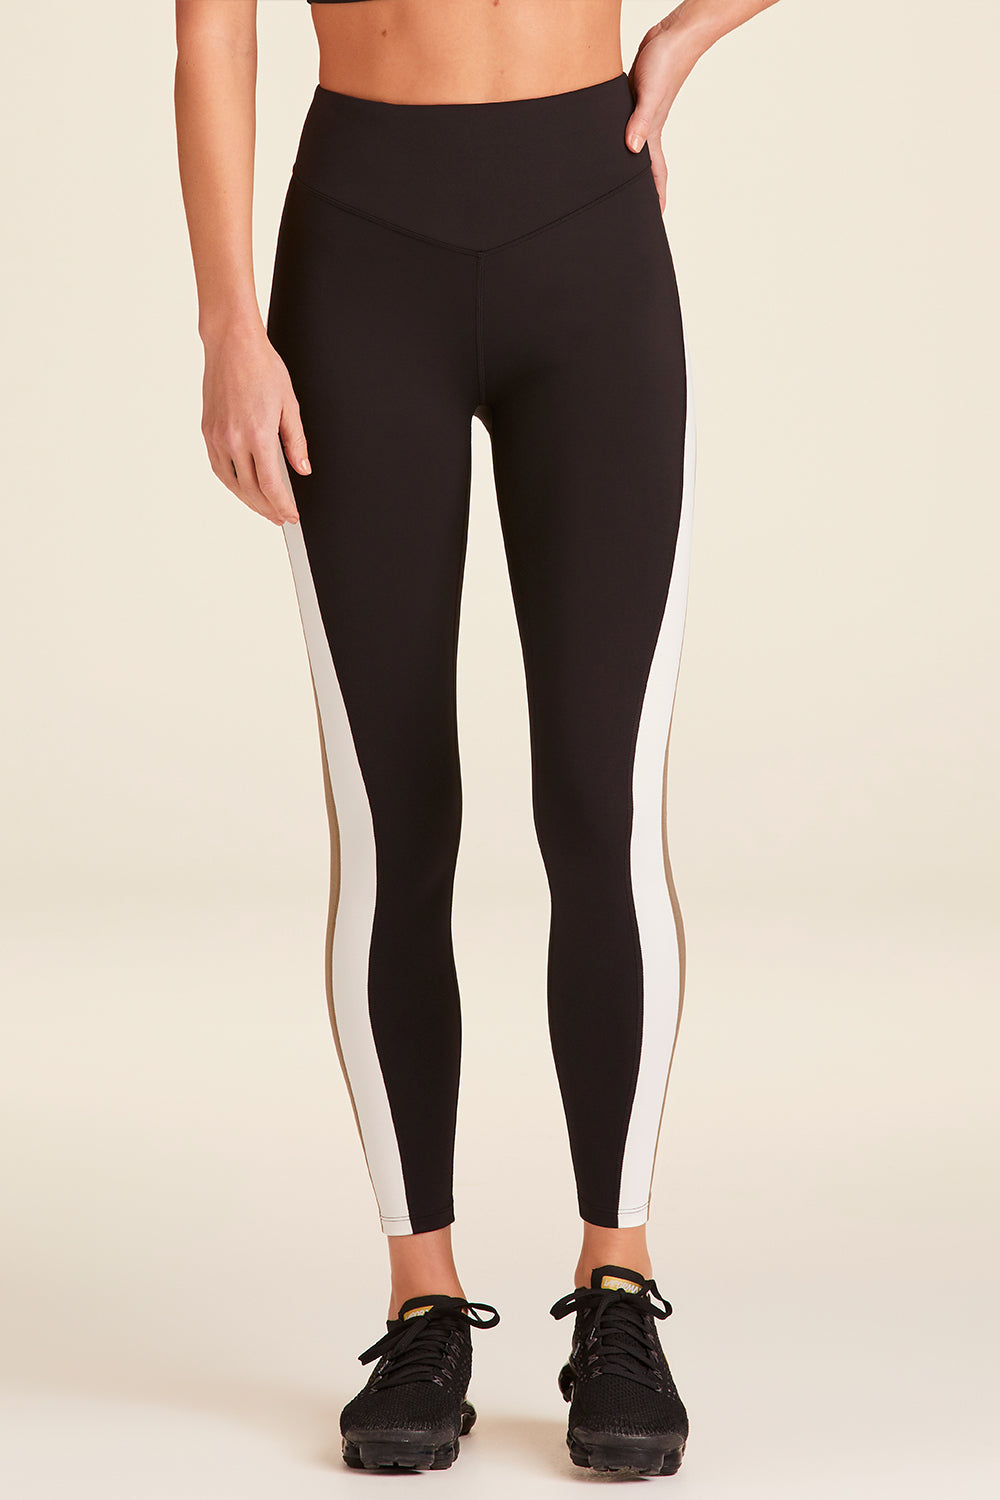 Front view of Alala Luxury Women's Athleisure bolt tight in black, gold, and bone